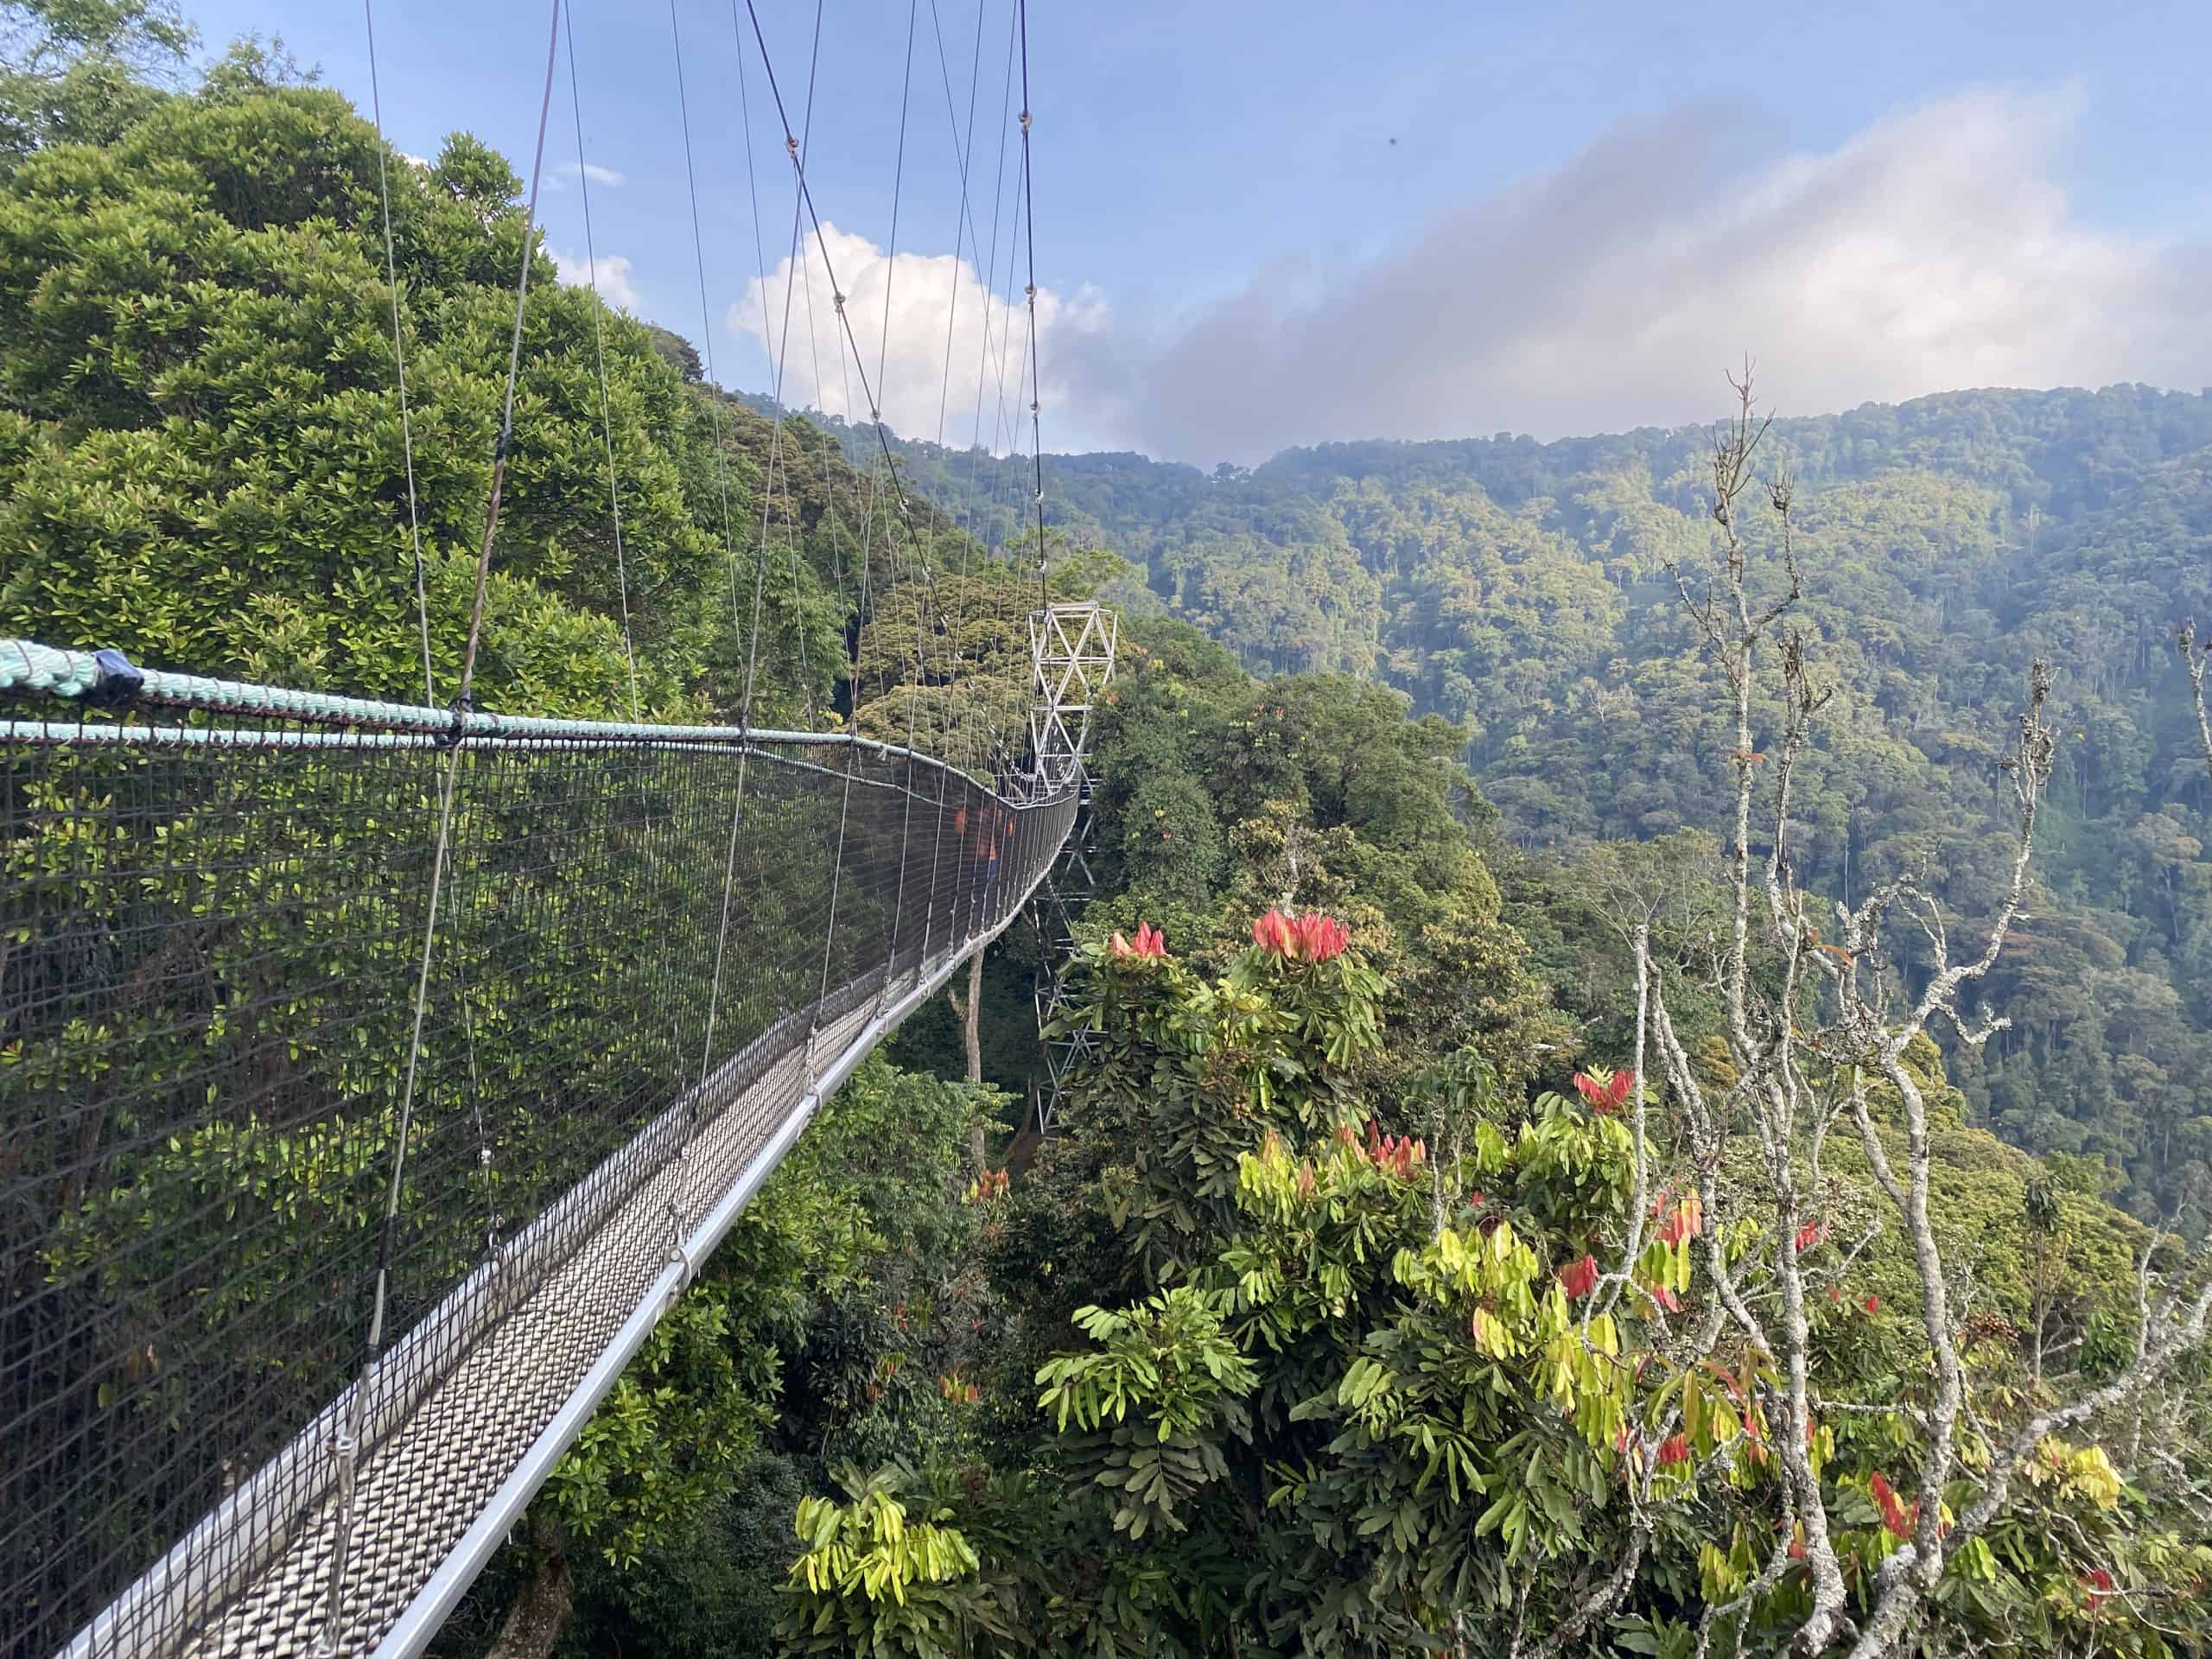 The view across the Nyungwe canopy walk